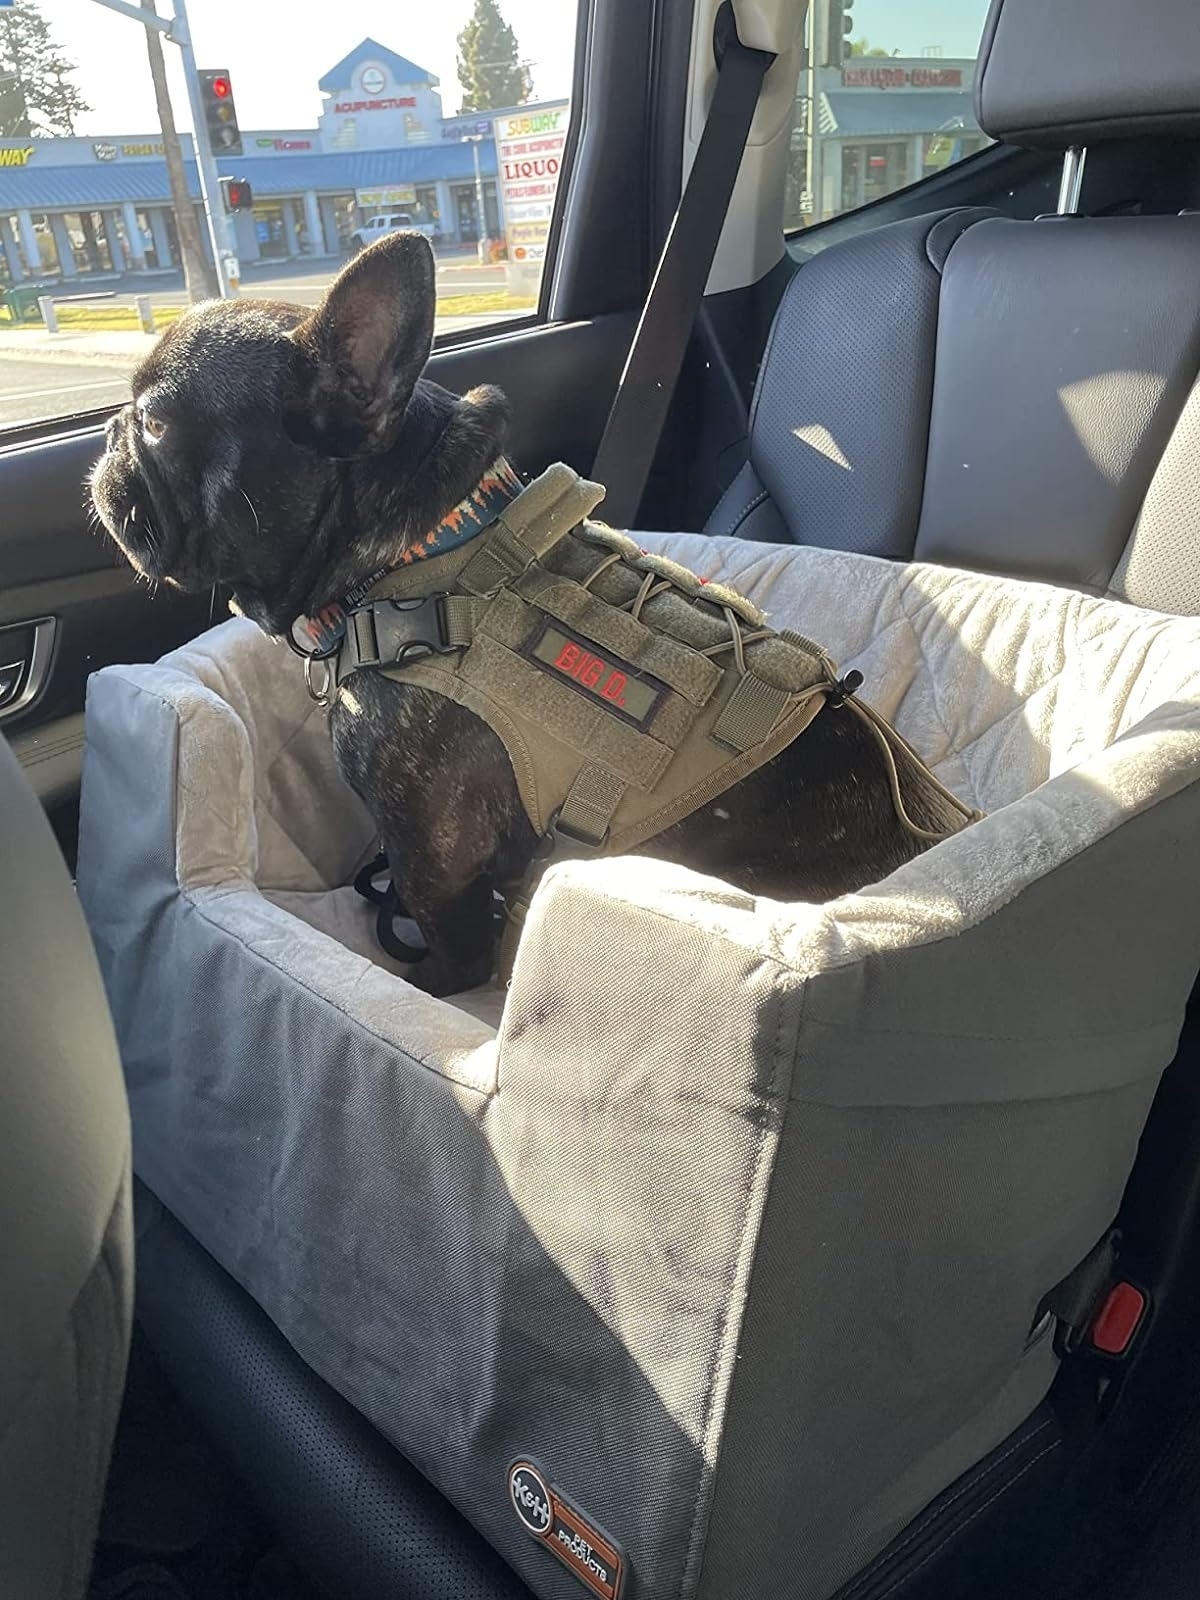 A French Bulldog wearing a harness is seated in a secure dog car seat for safe travel